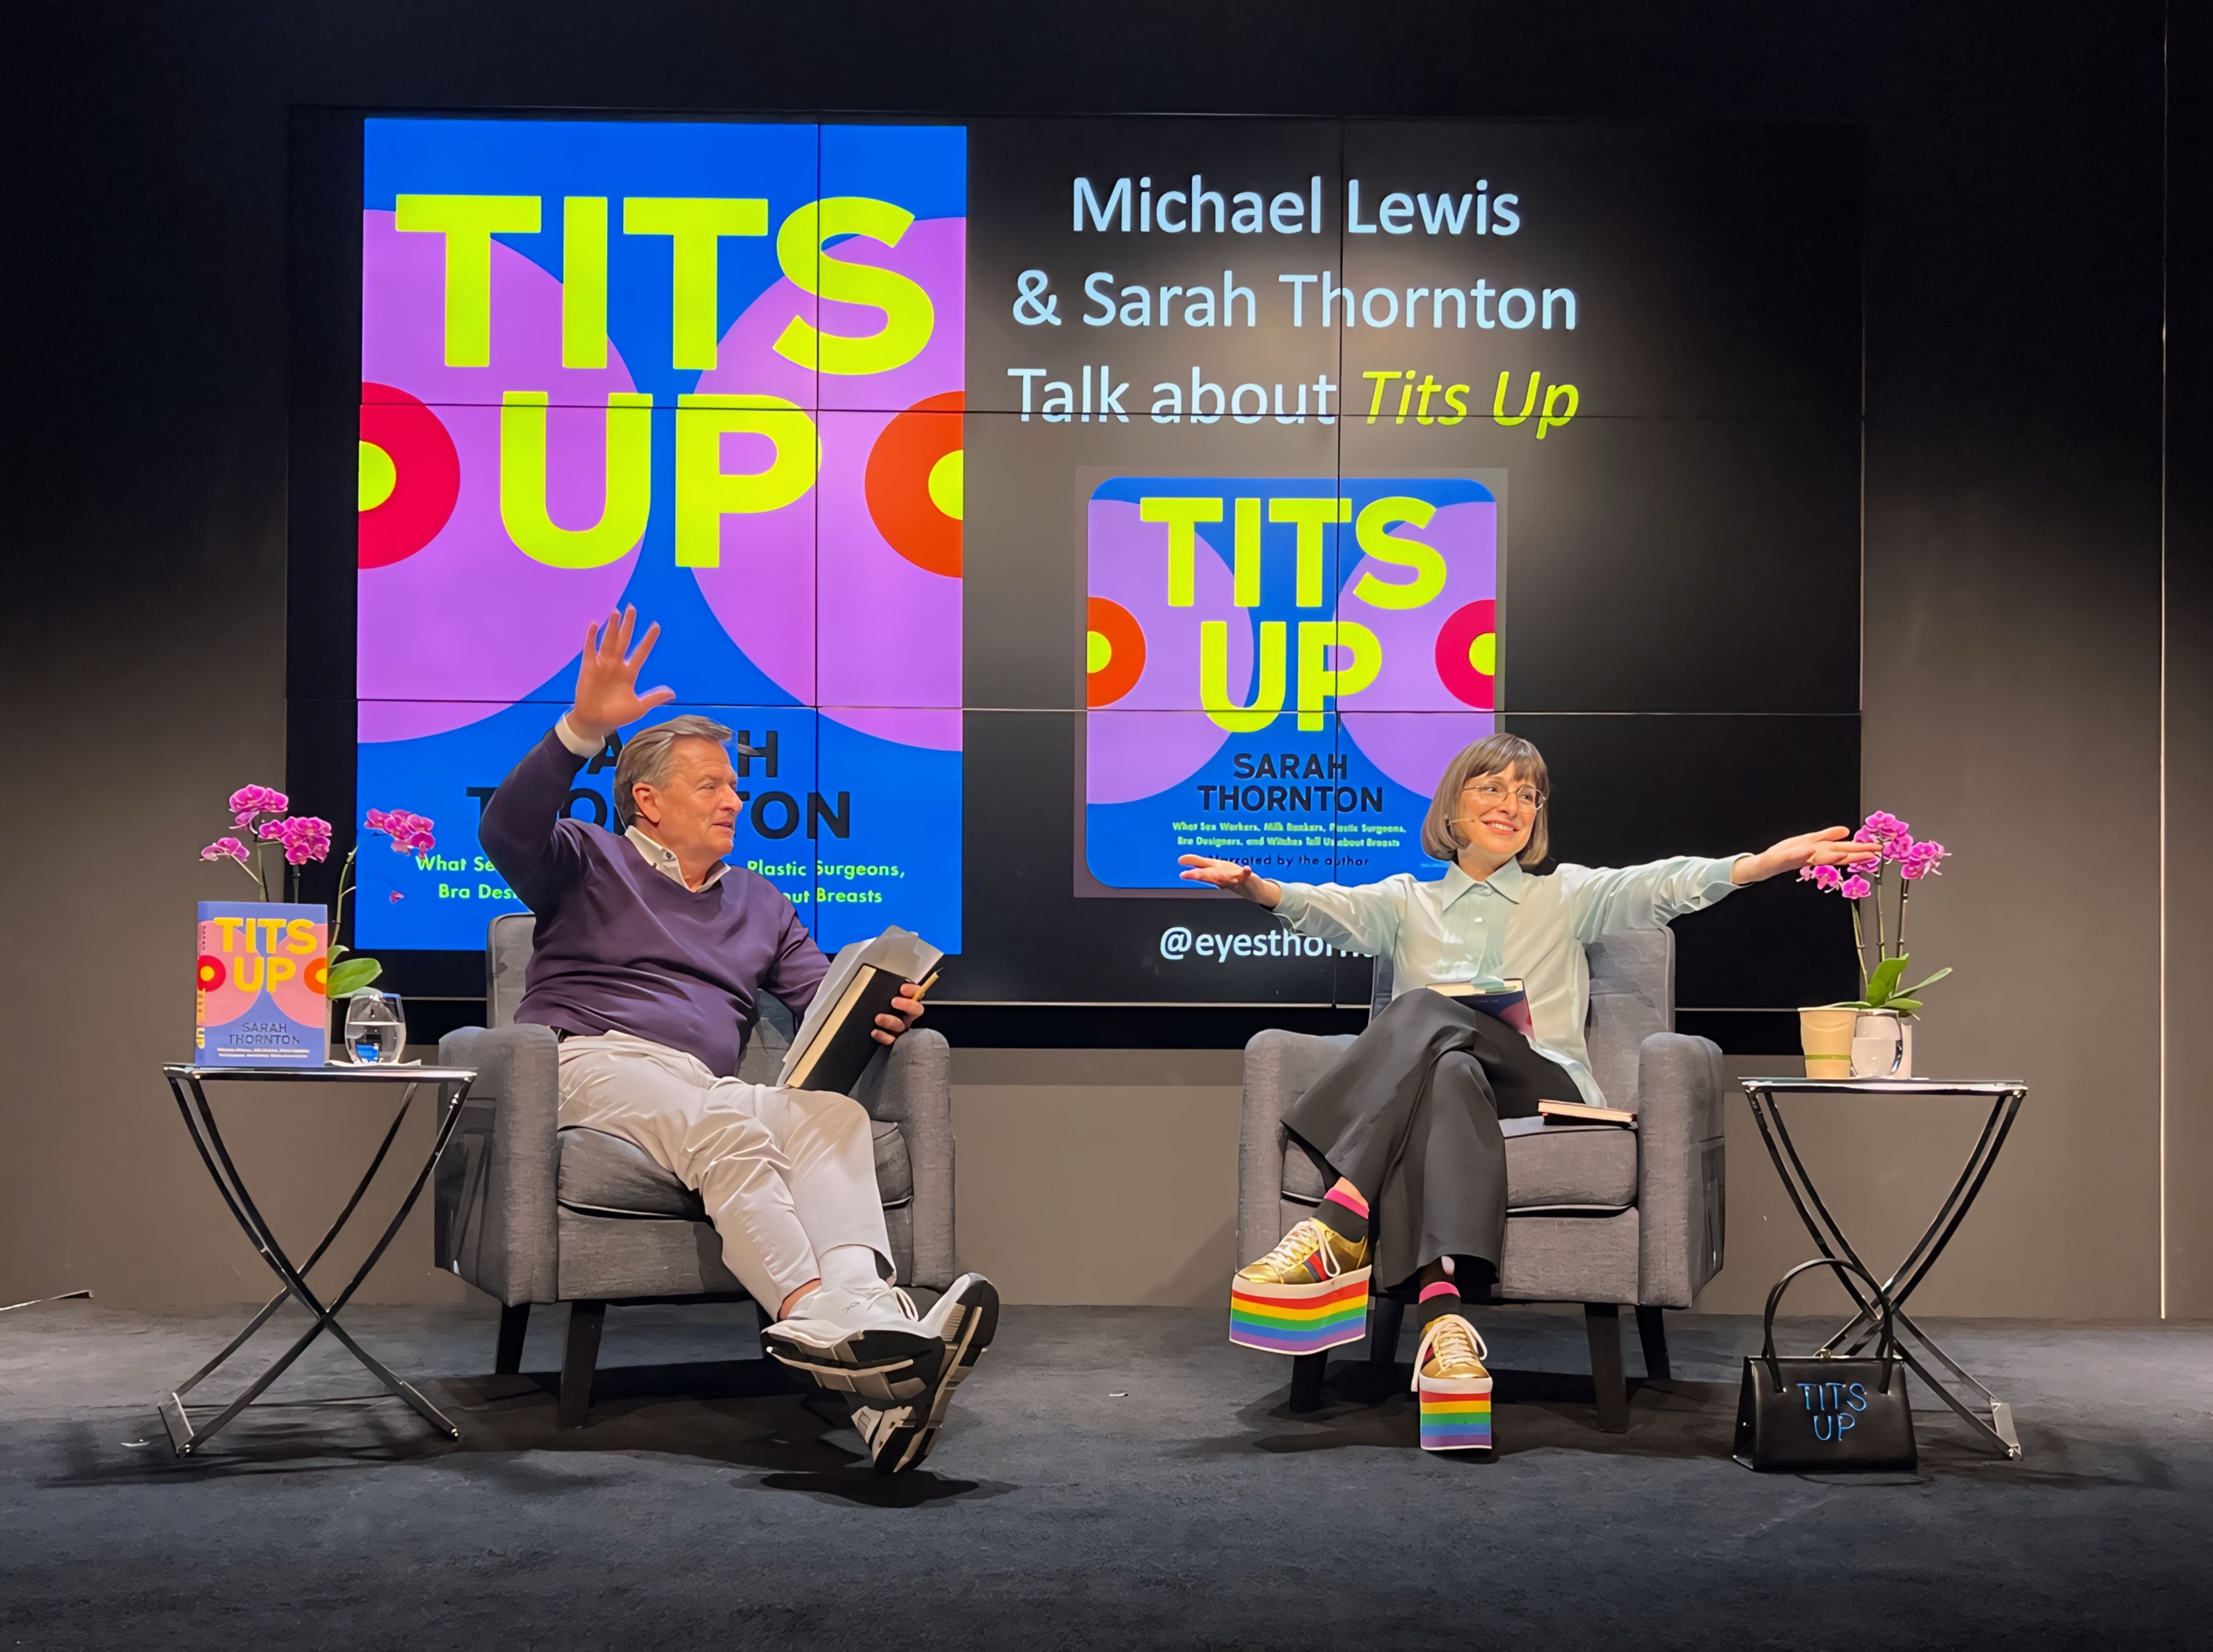 Two people are seated on stage waving, with a backdrop advertising a &quot;Tits Up&quot; talk and book.